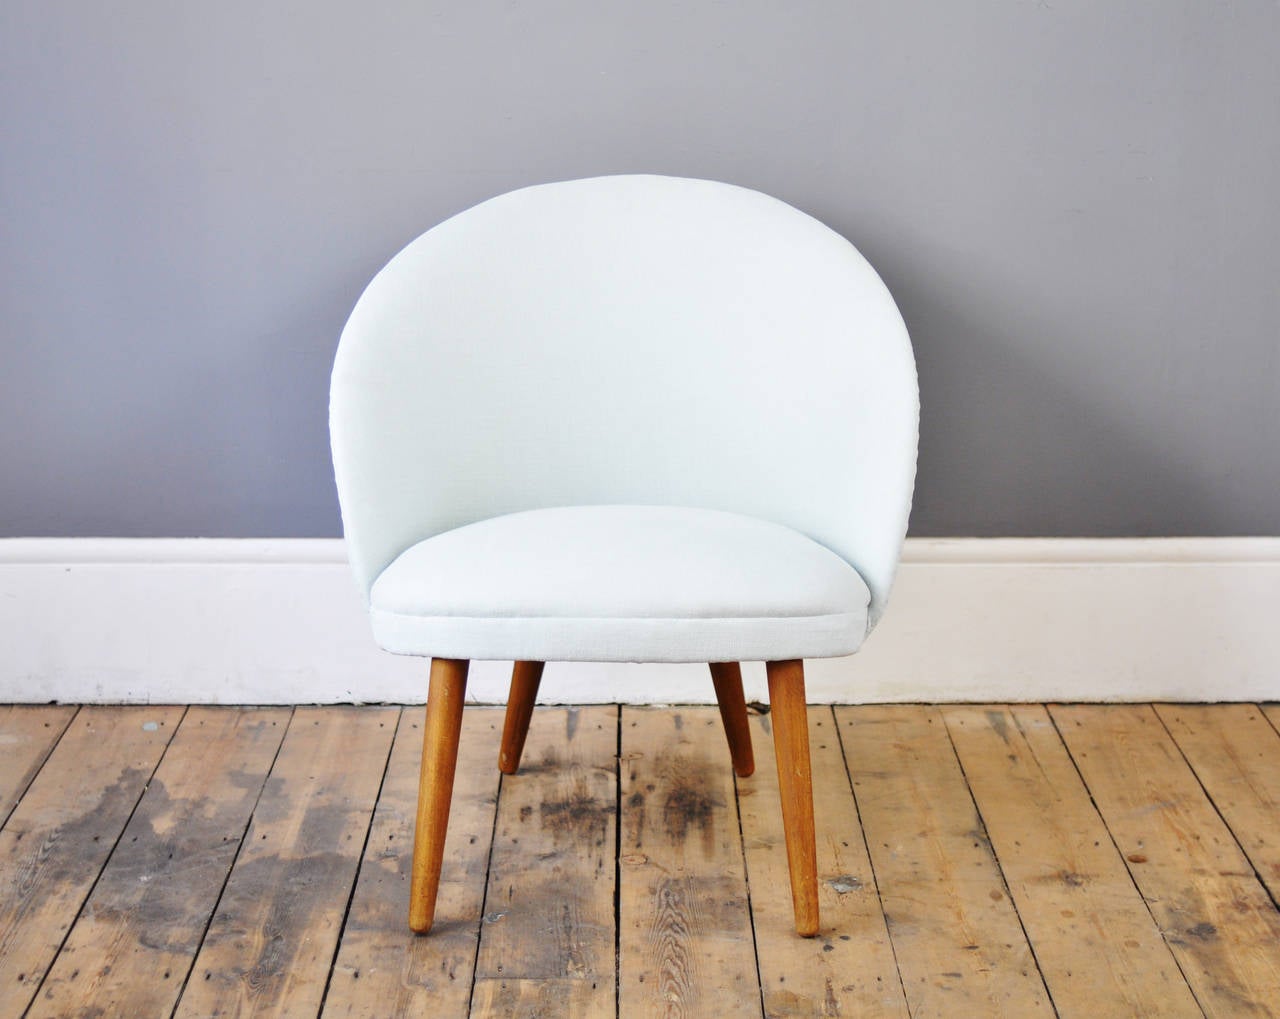 Charming Danish armchair with a softly rounded back providing an enveloping seat. Newly upholstered in ice blue fabric which has been treated for stain resistance.